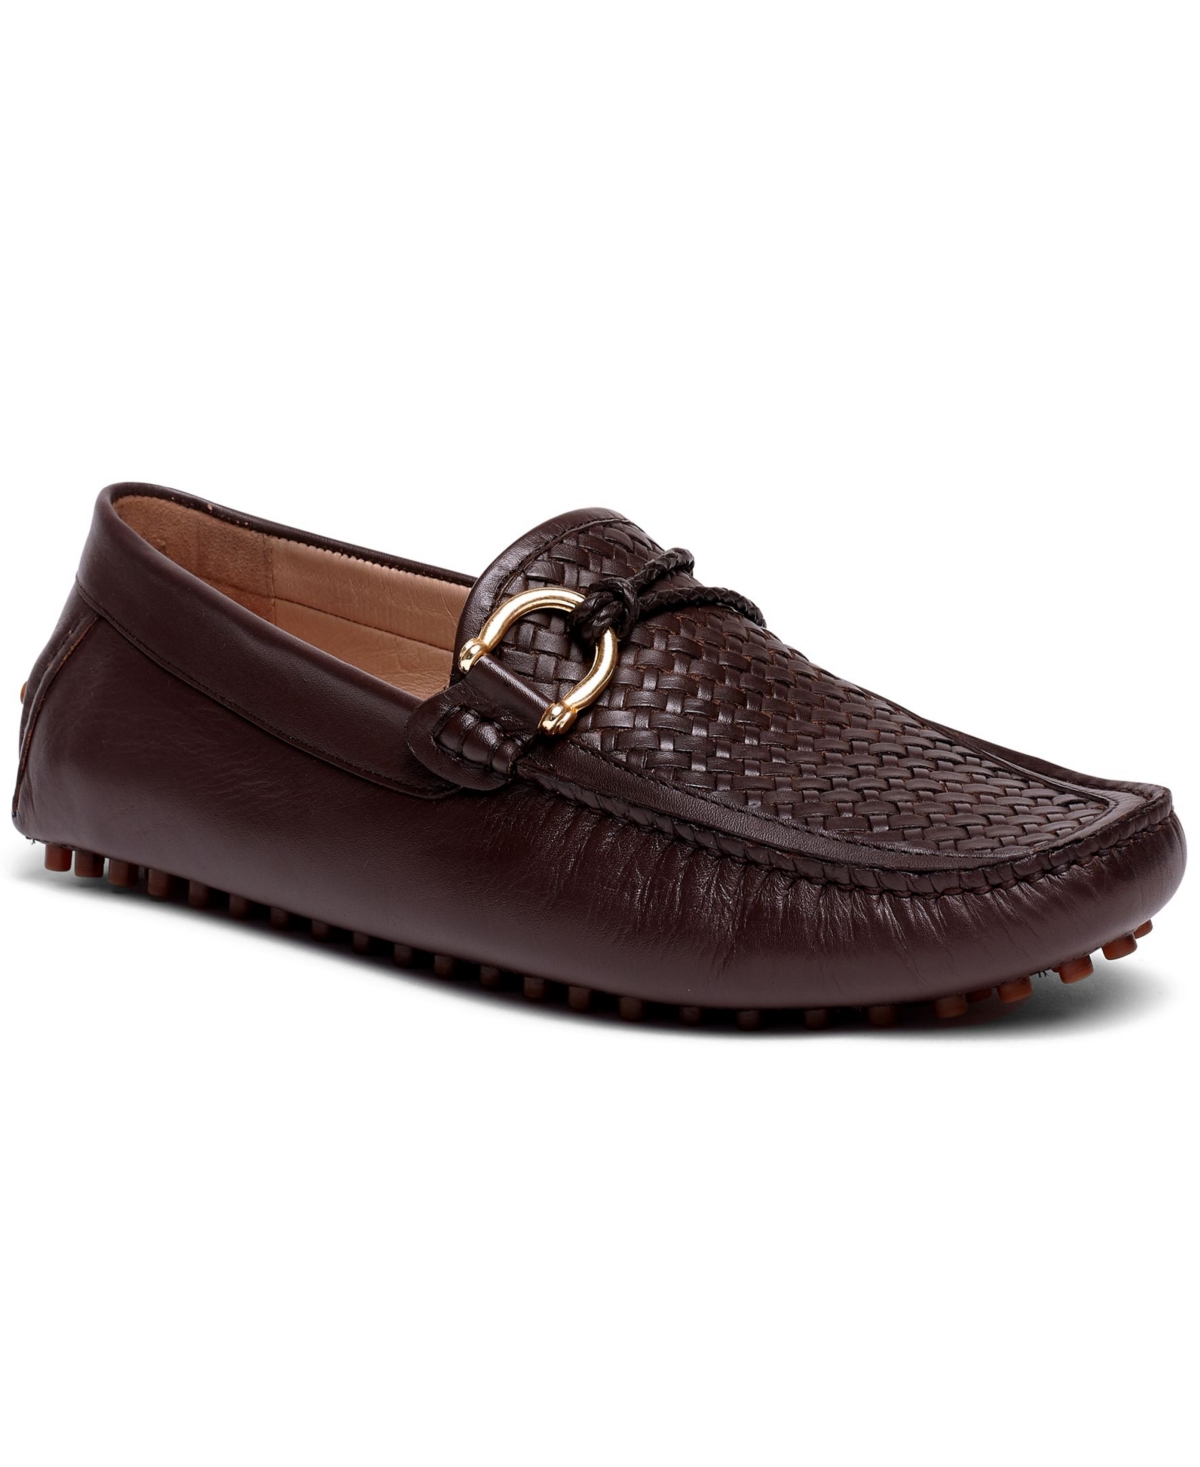 Men's Malone Interweave Driver Leather Loafer Slip-On Casual Shoe - Coffee